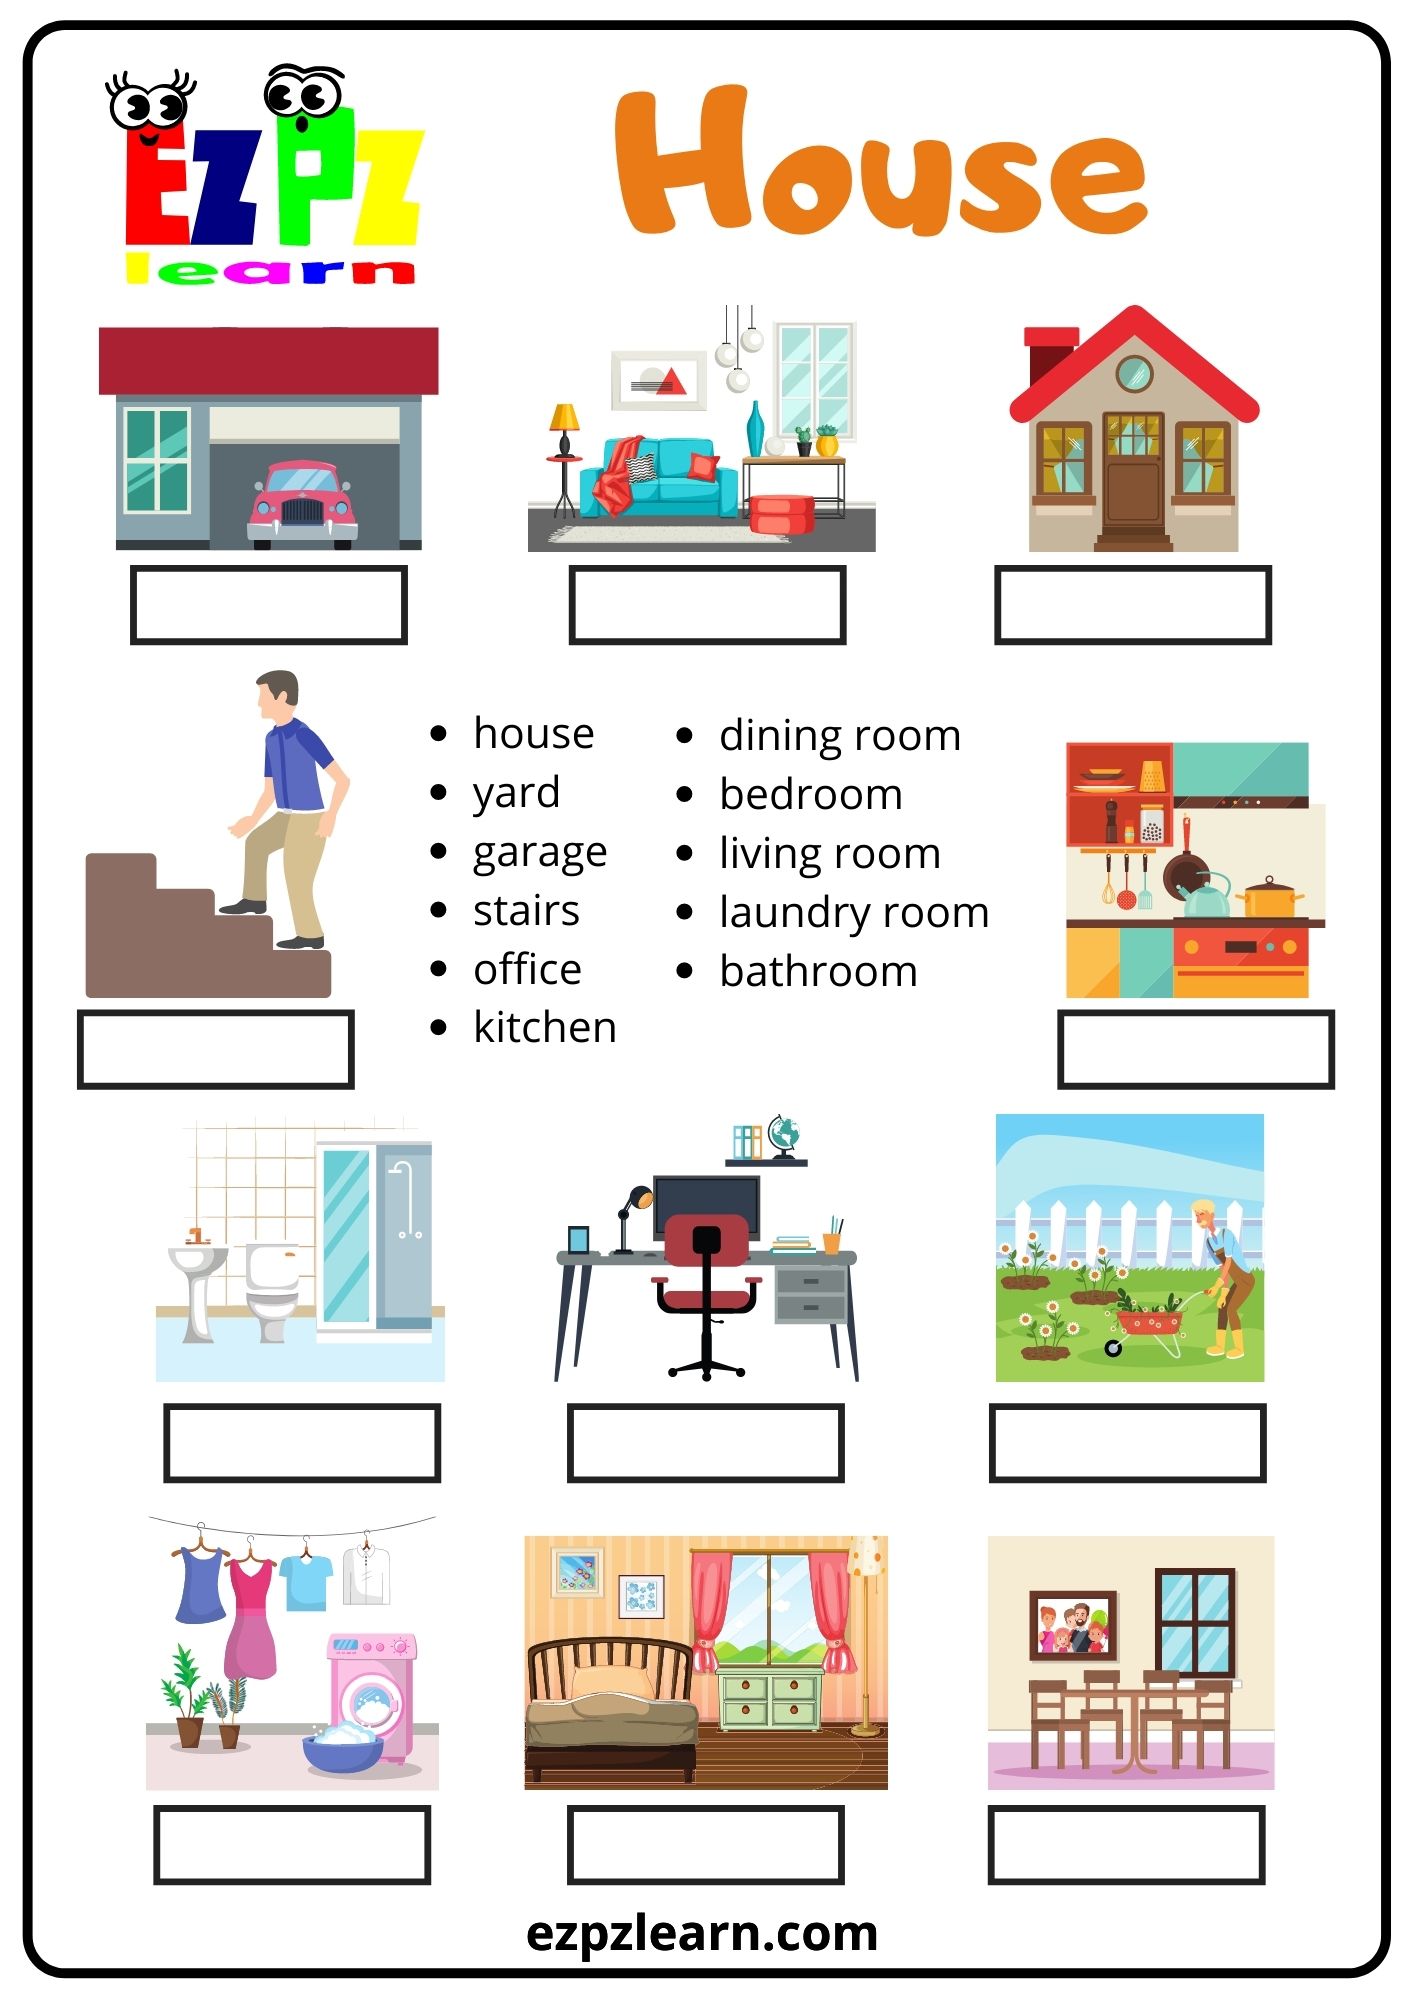 ROOMS of the house Free Activities online for kids in 2nd grade by